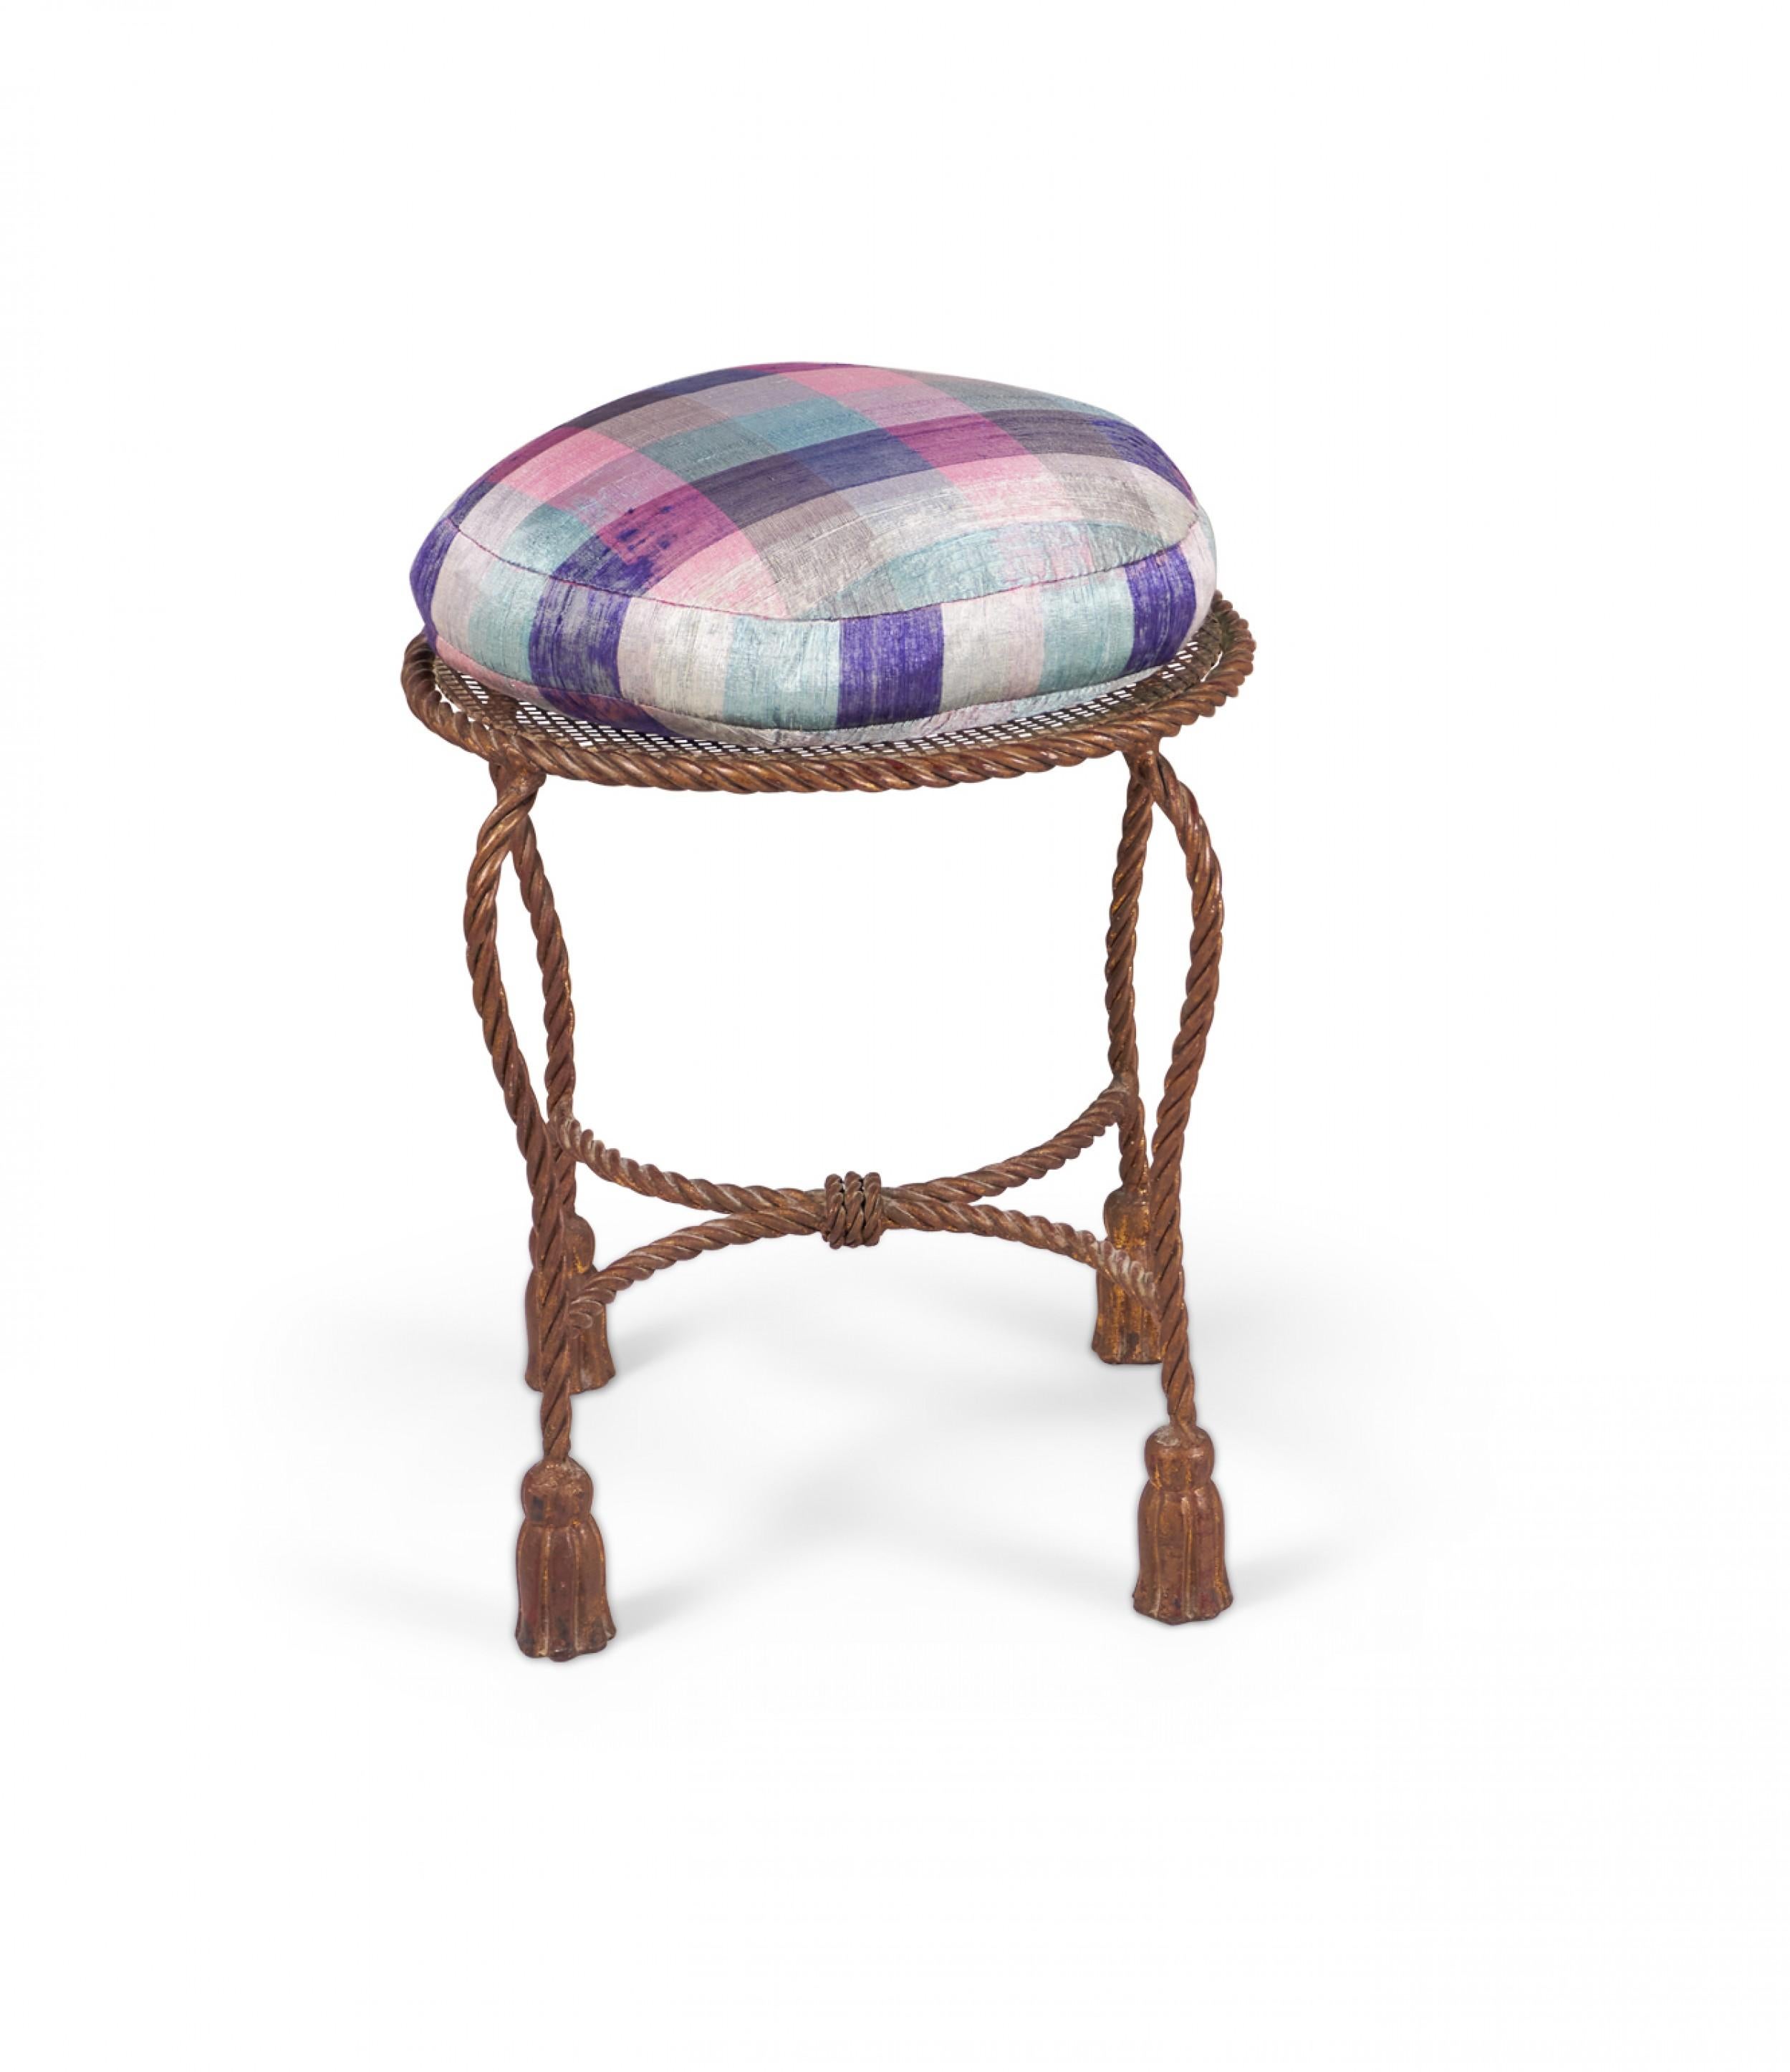 Italian Baroque-style mid-century (circa 1950) Rope and Tassel vanity stool with a gilt iron frame and unattached purple pink and green plaid seat cushion. (Palladio, Italy).